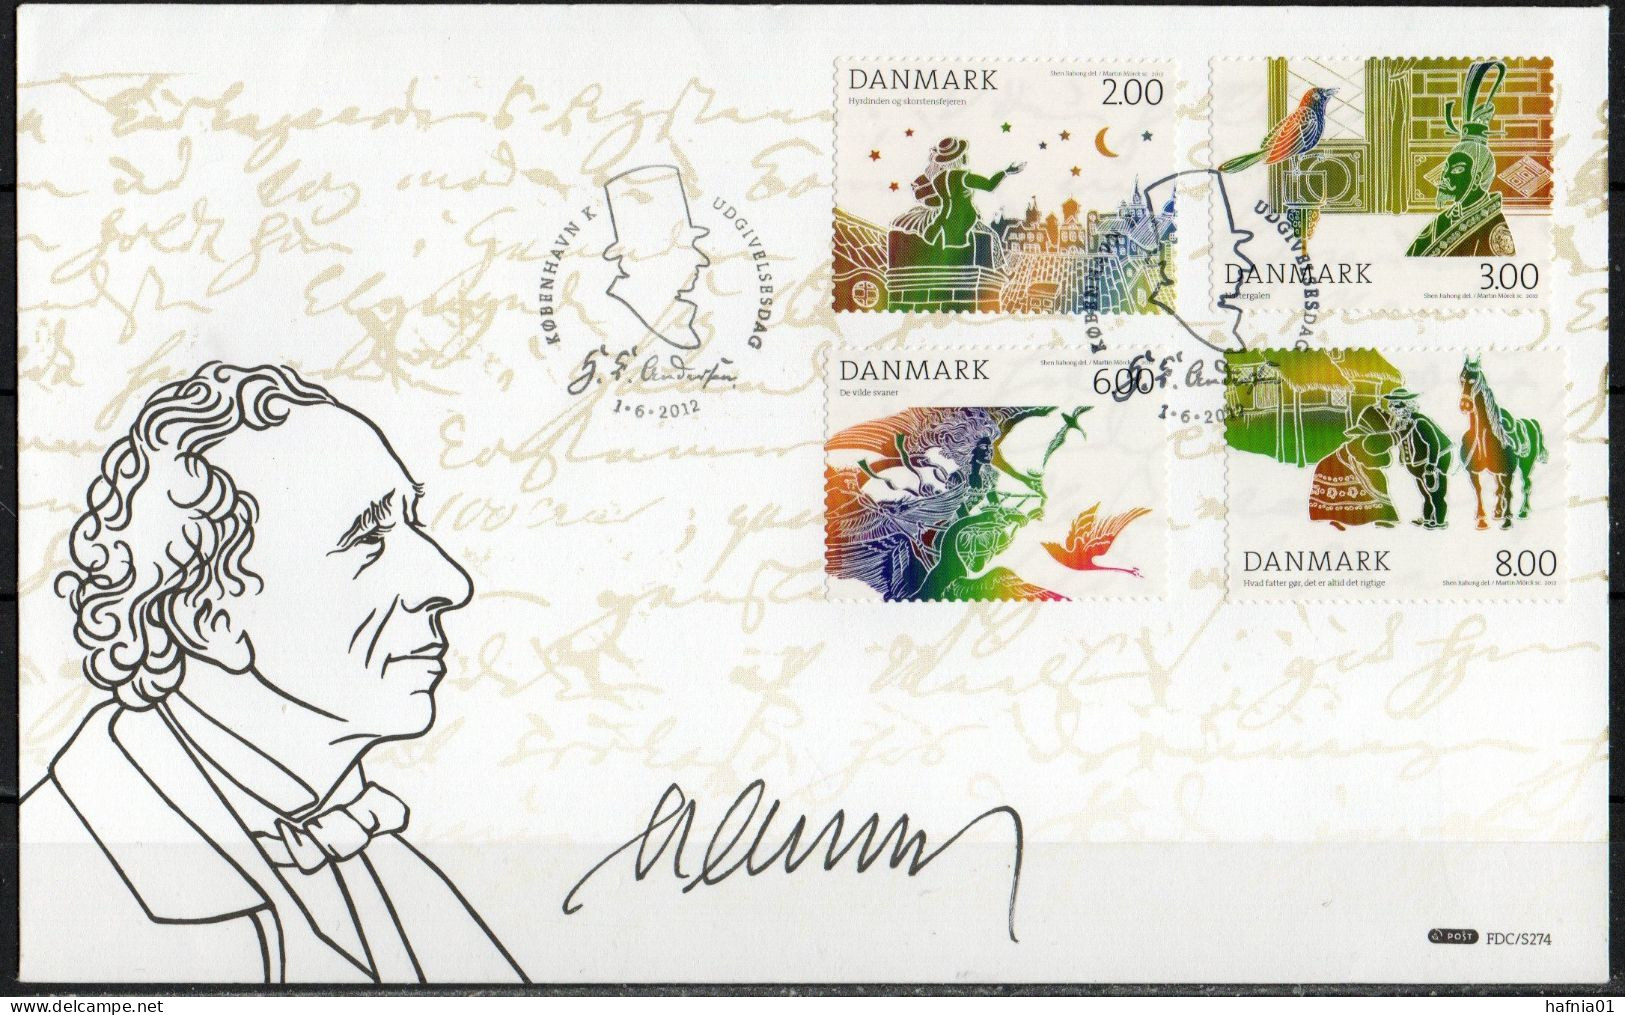 Martin Mörck. Denmark 2012. H.C. Andersen Fairy Tales. Michel 1701 A - 1704 A. FDC. Signed. - FDC